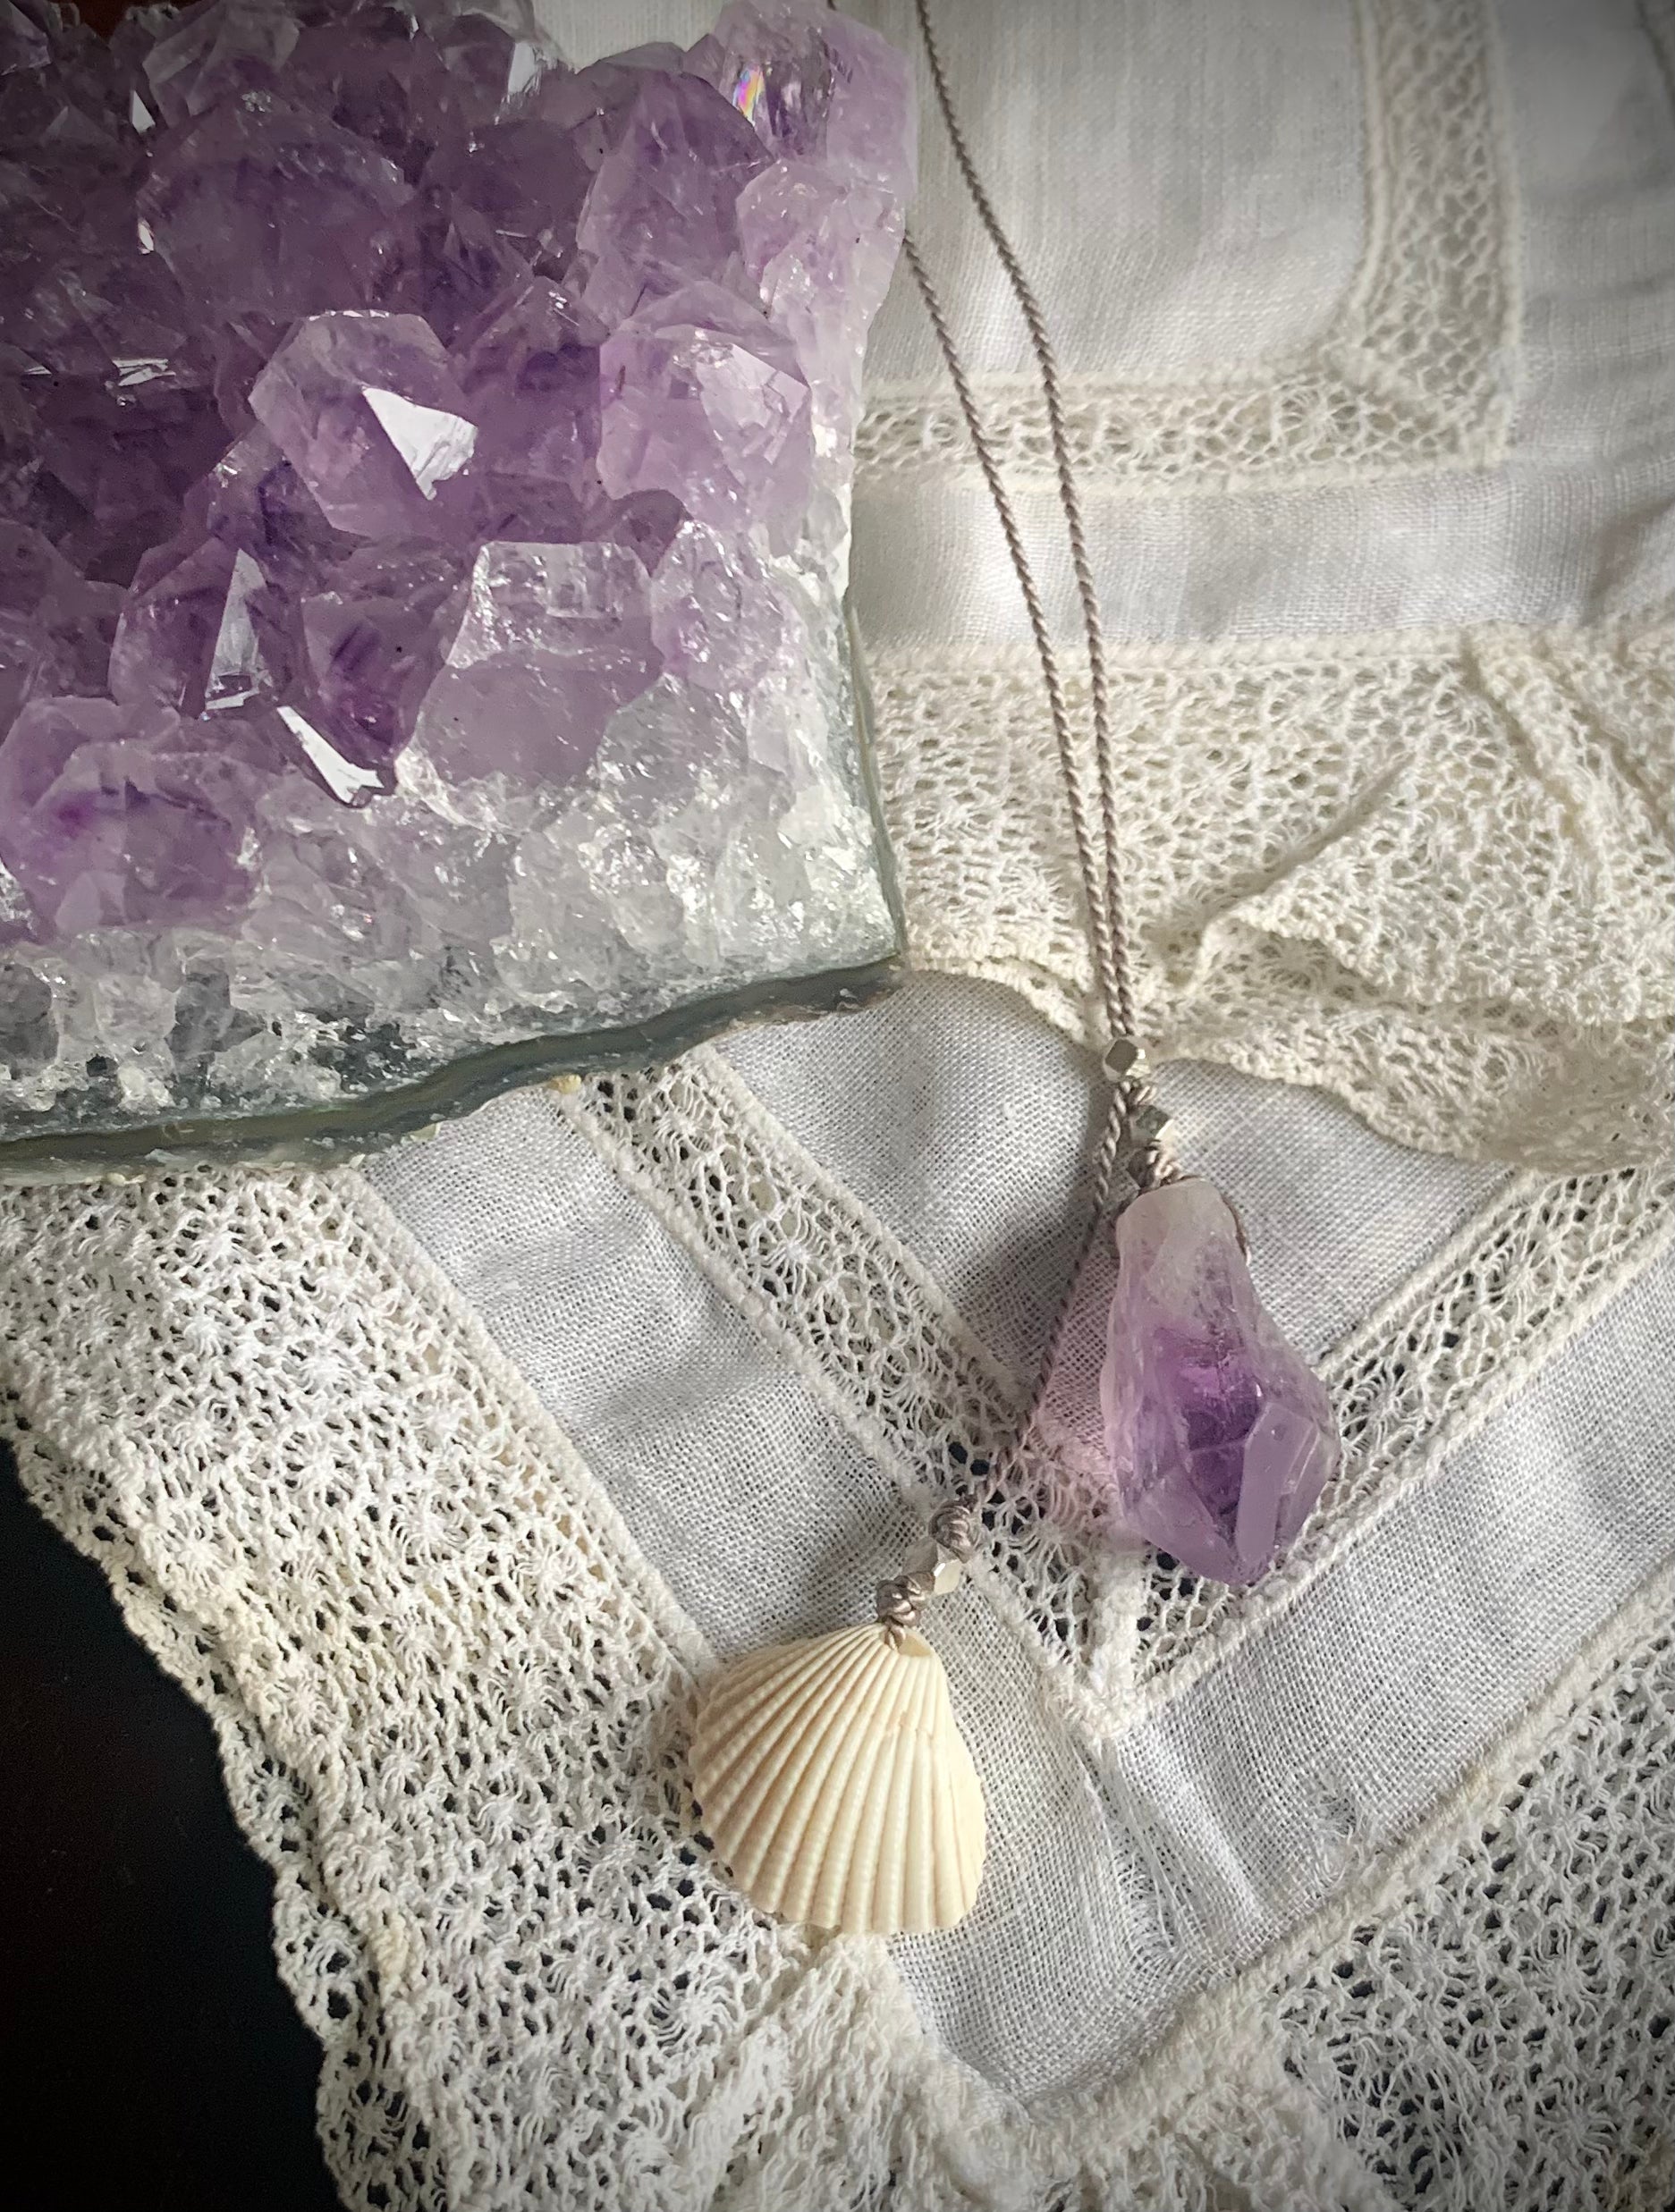 How to Wear Amethyst Crystal Jewelry for Spiritual Growth - Dance